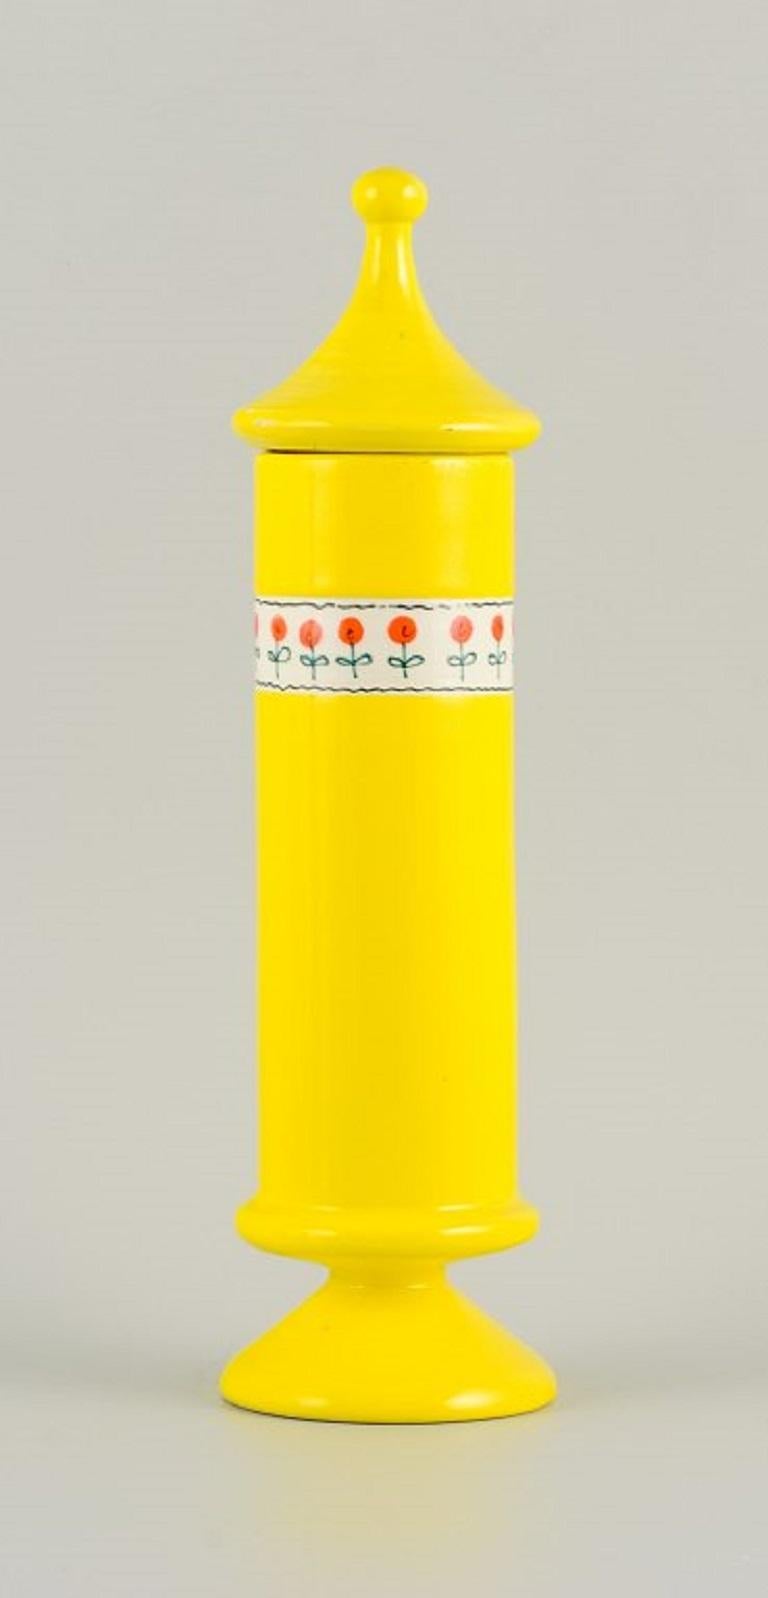 Alvino Bagni, Italy. Unique tall vase in yellow hand-decorated ceramic.
1960s-1970s.
In perfect condition.
Signed.
Dimensions: H 32.0 x D 9.0 cm.